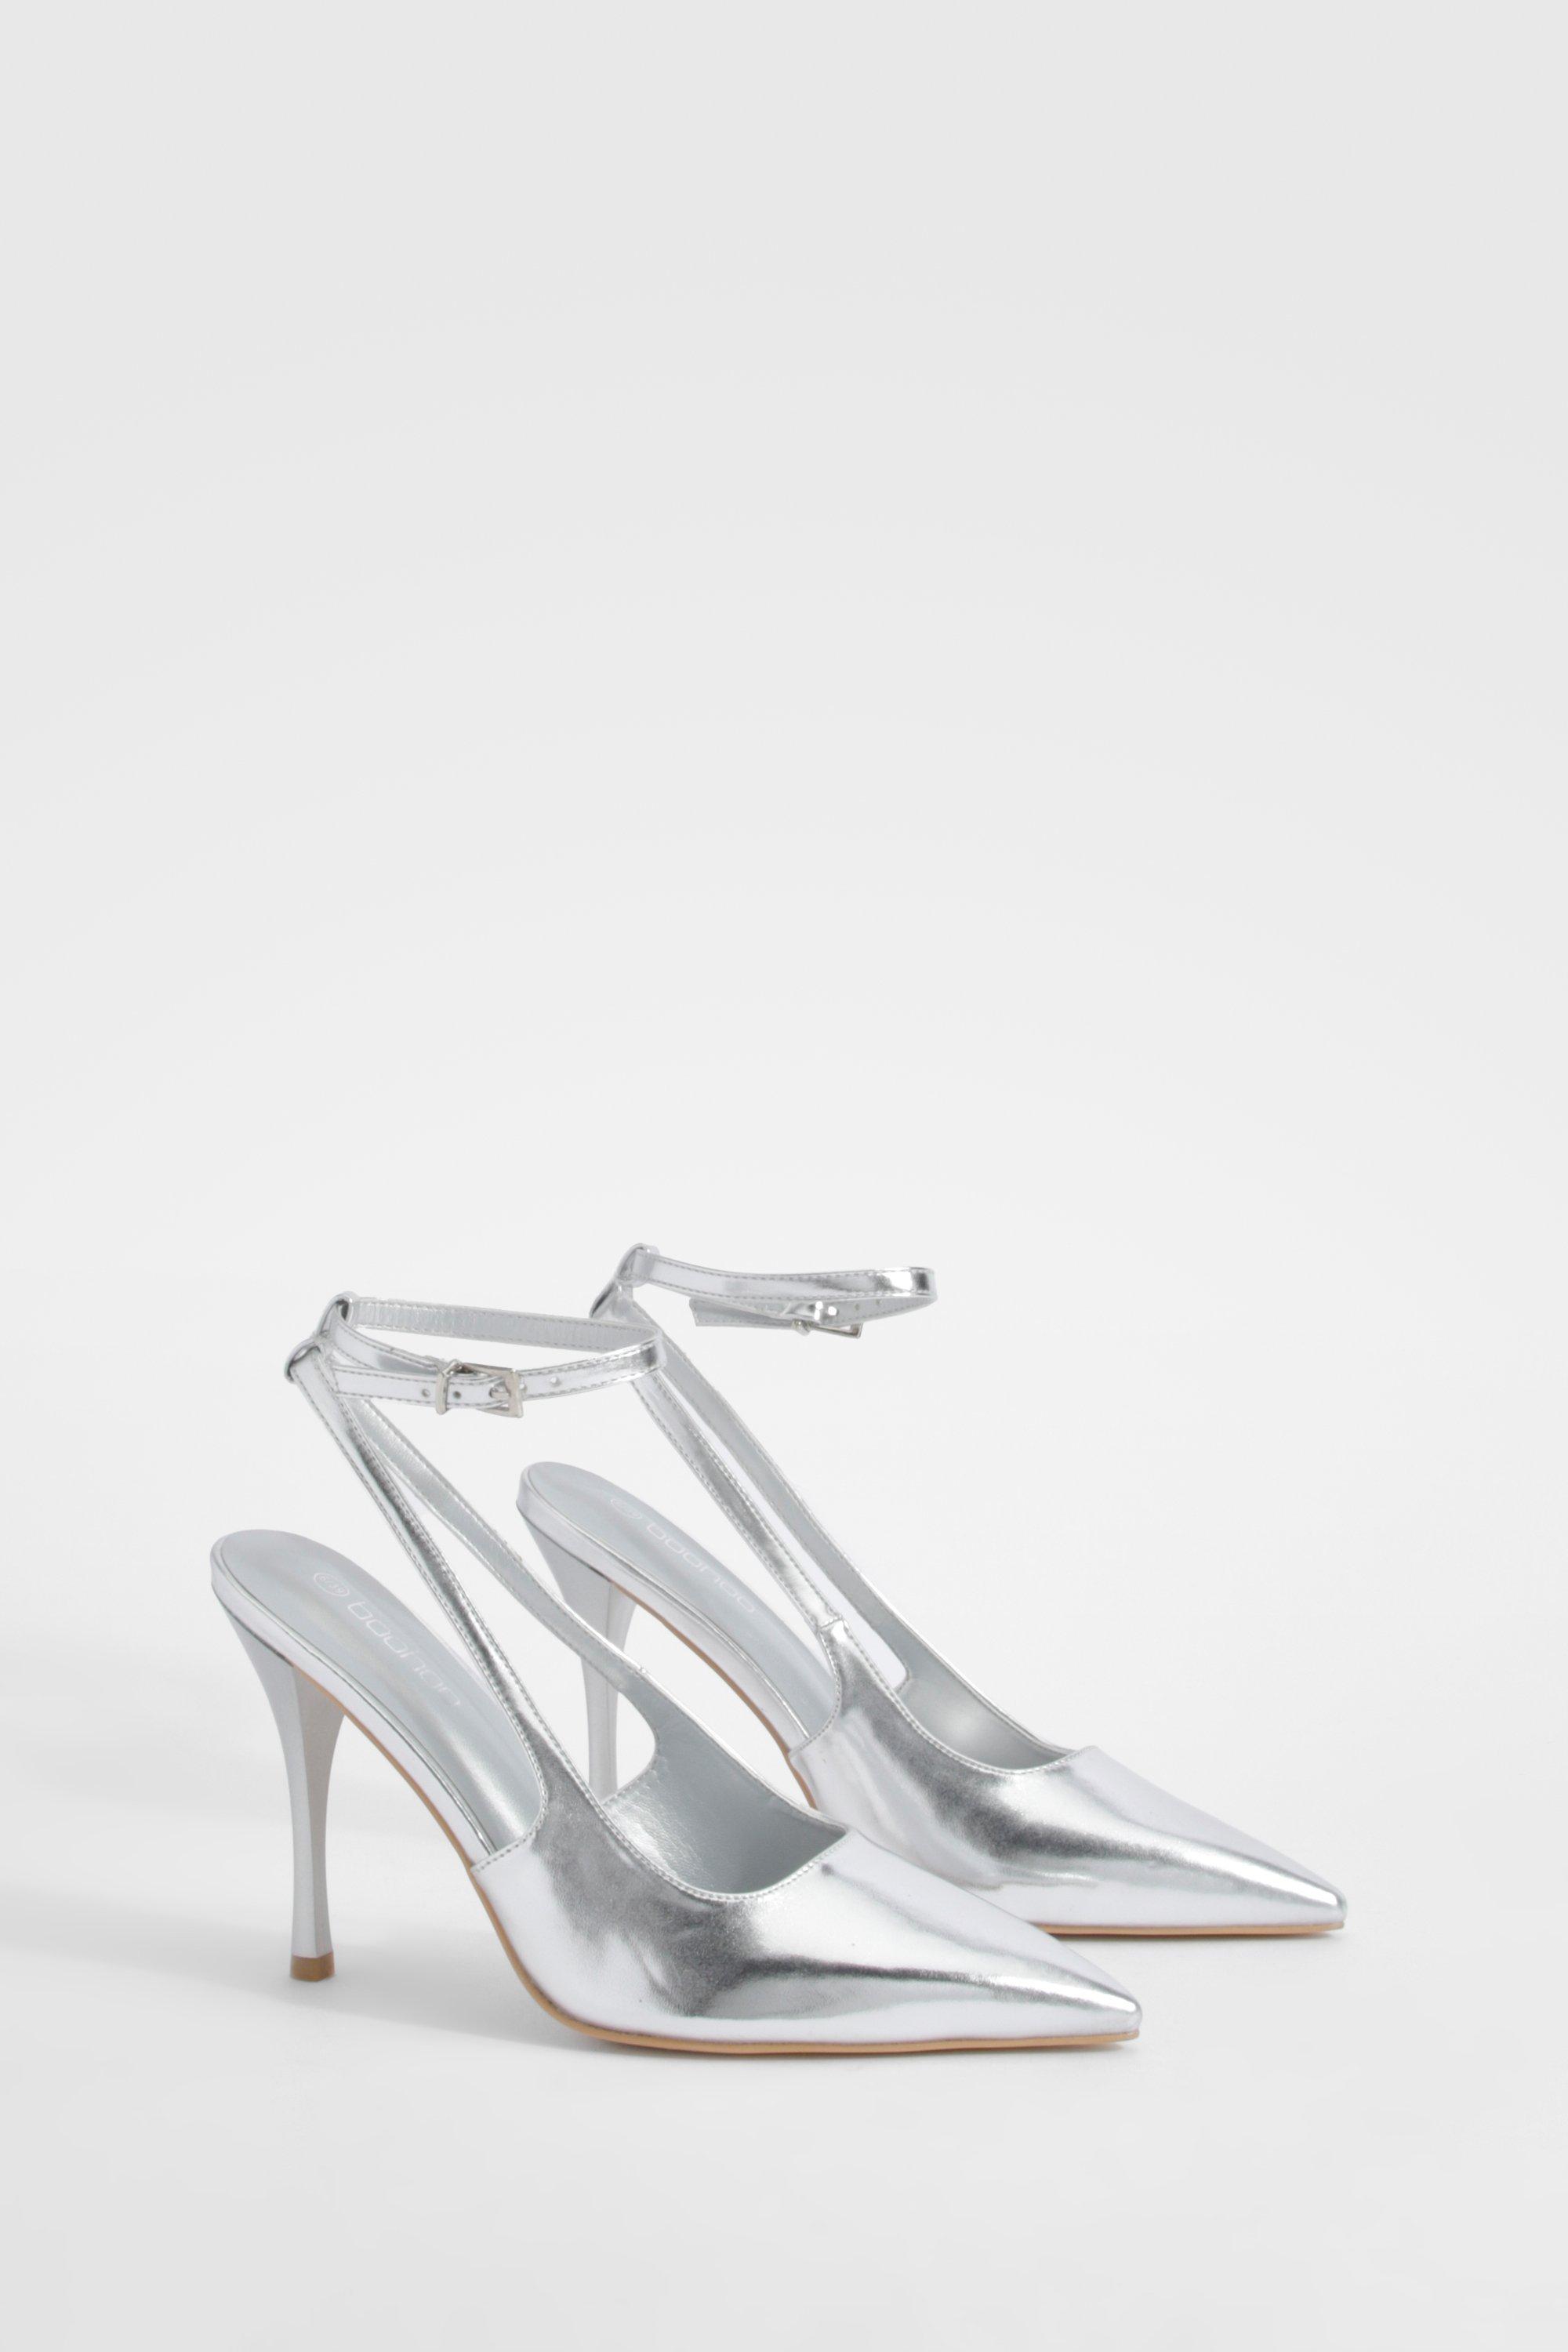 Image of Metallic Cut Out Detail Lace Up Court Shoes, Grigio